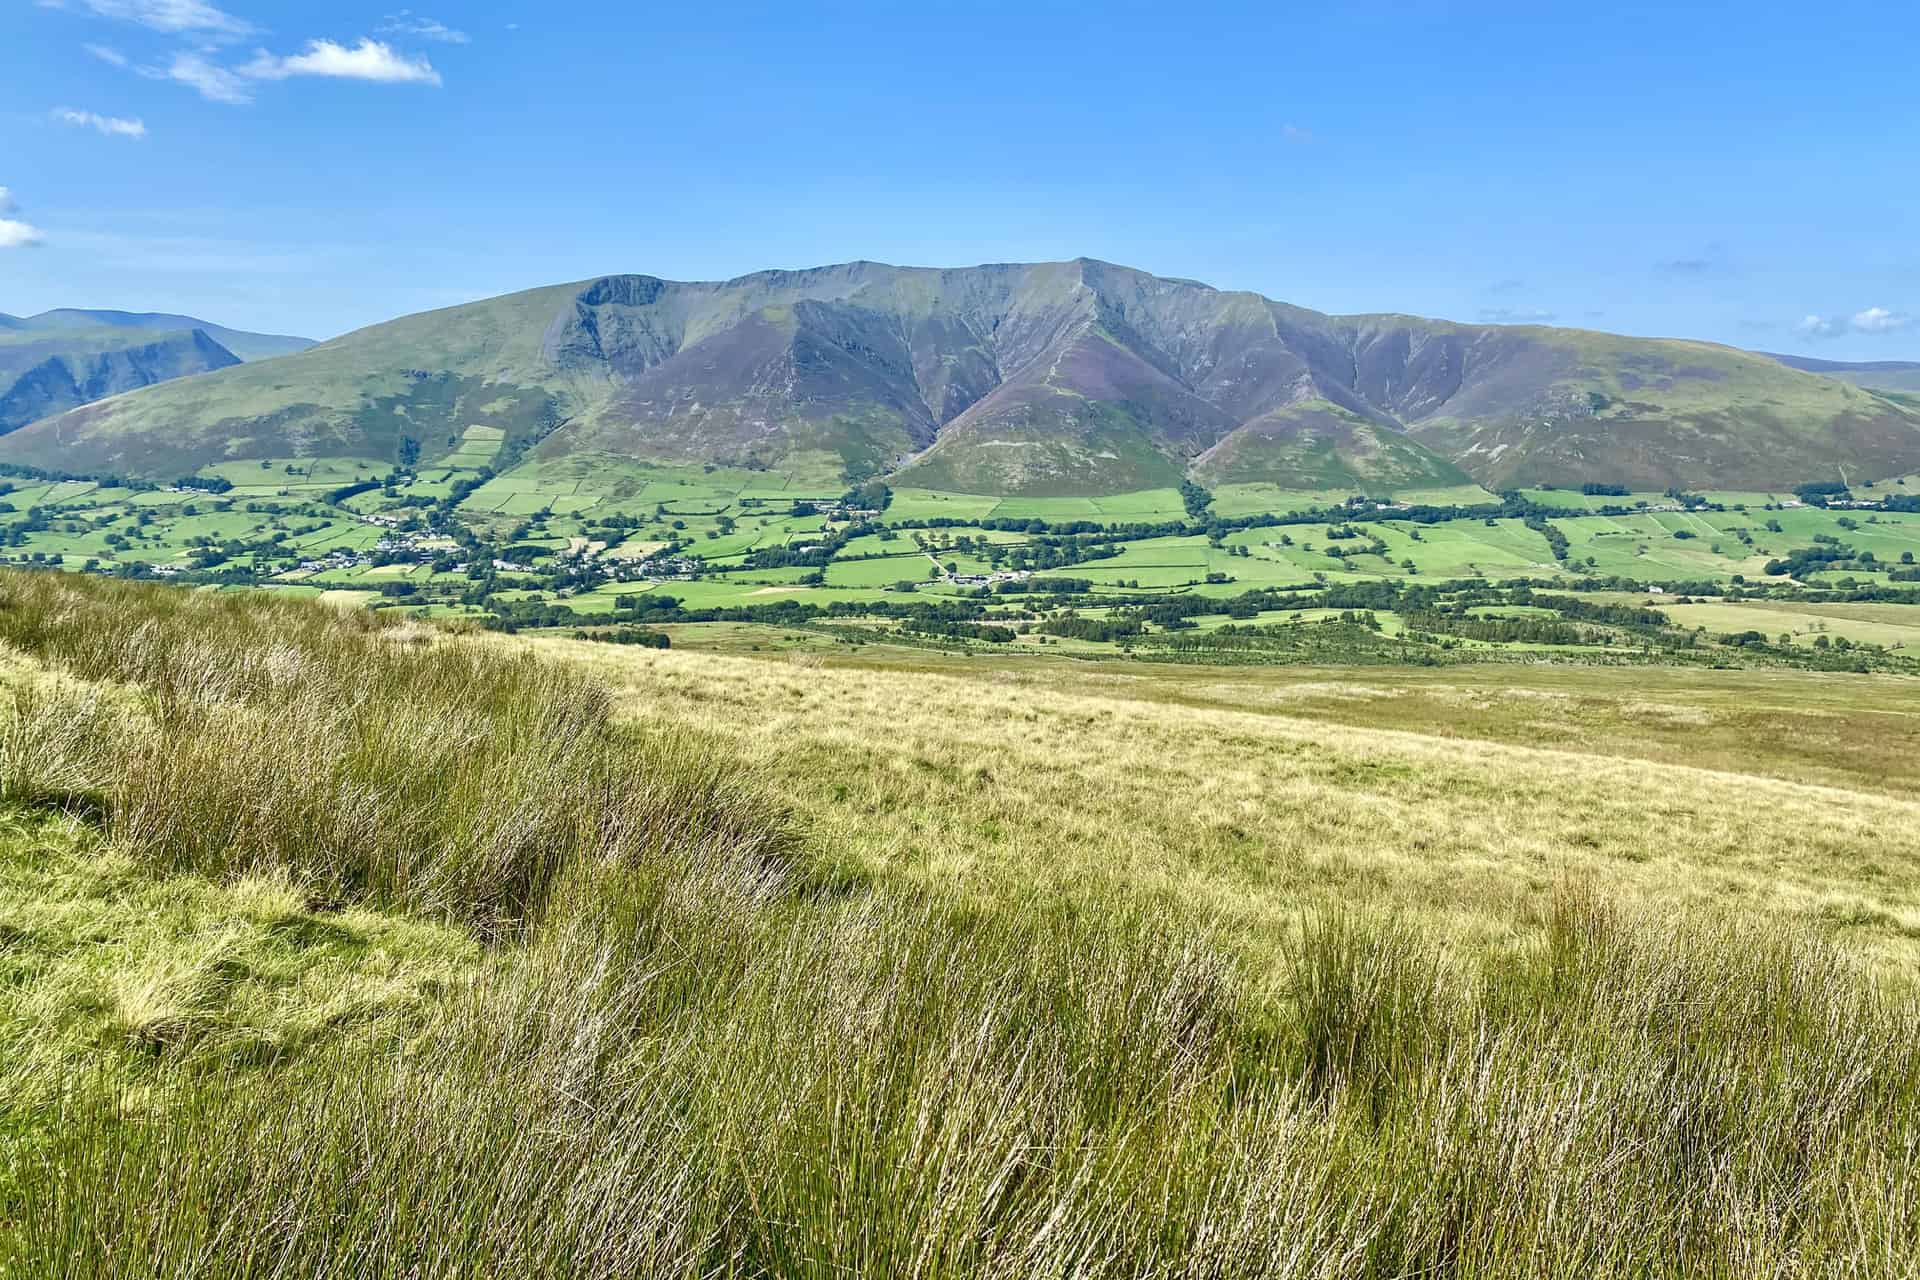 The view of Blencathra from Hausewell Brow.